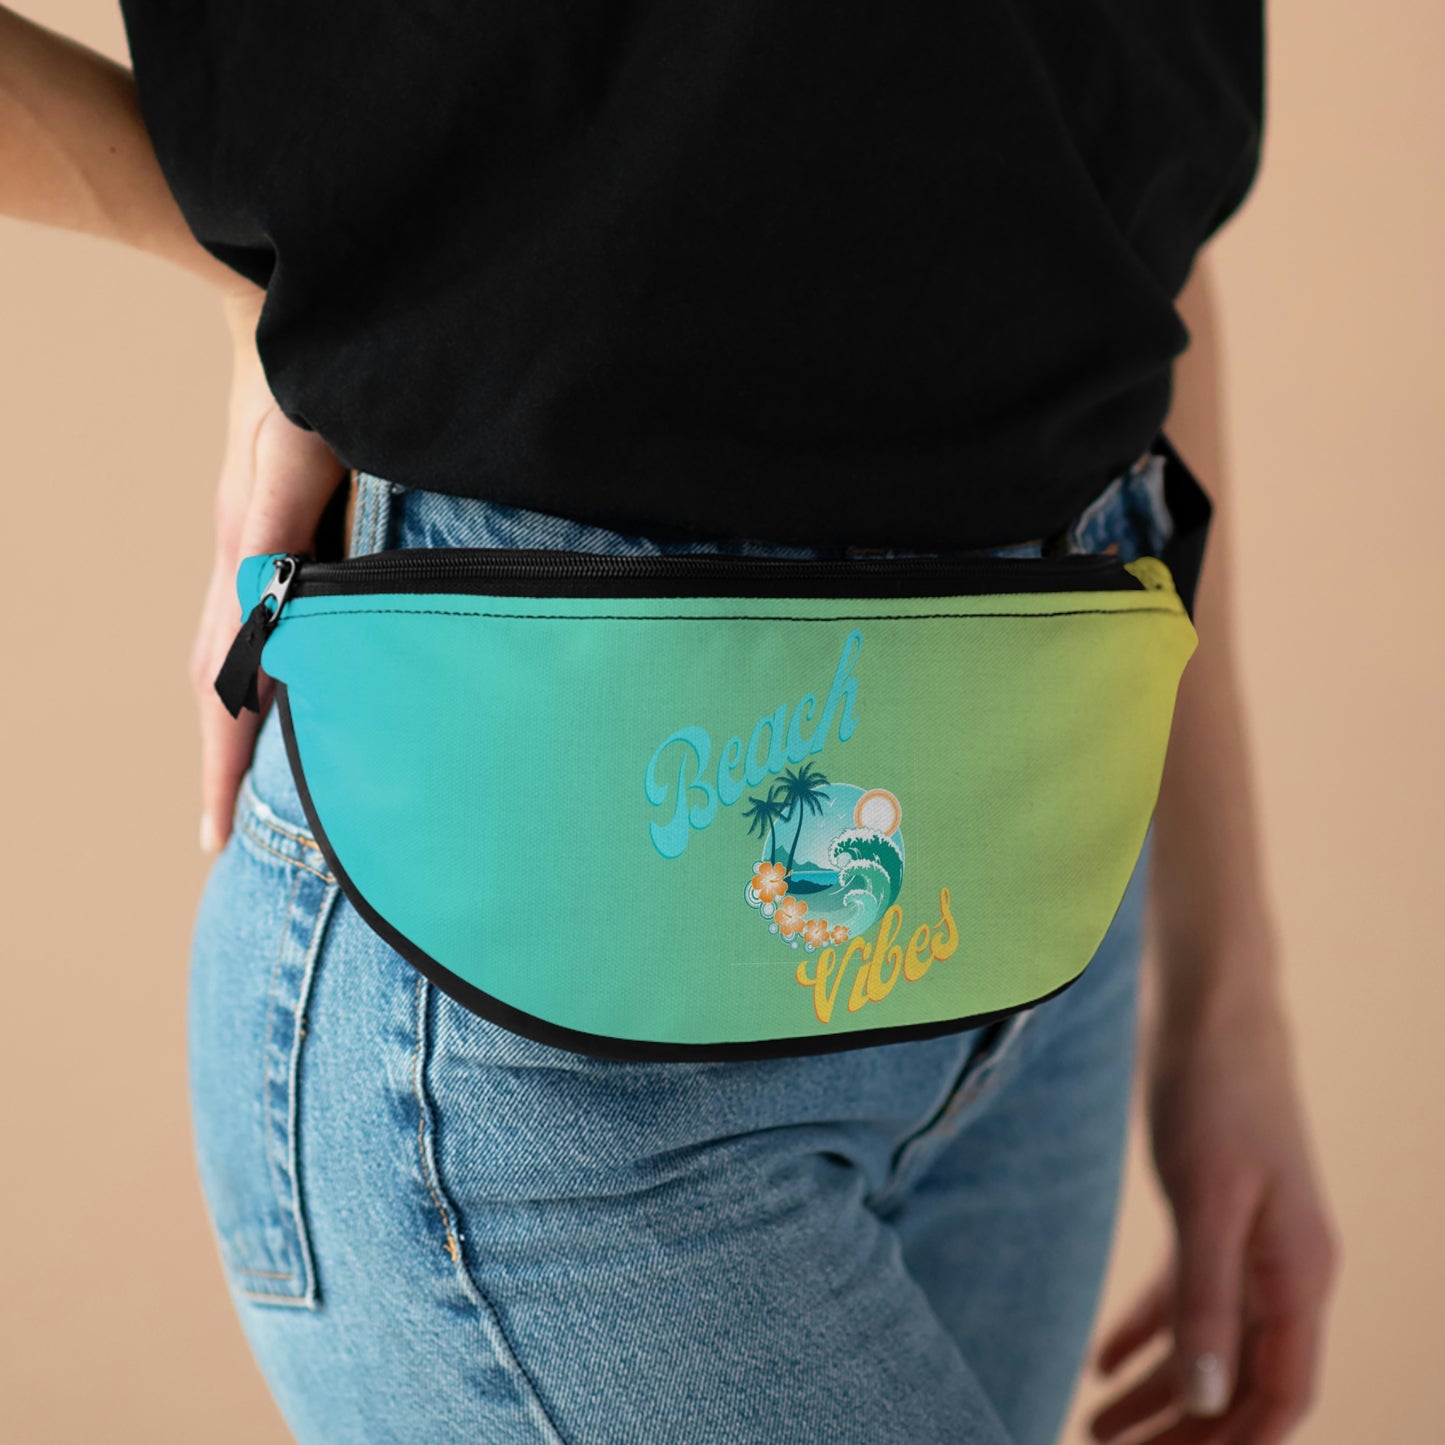 Beach Vibes Fanny Pack with Flip Flops Printed on Top